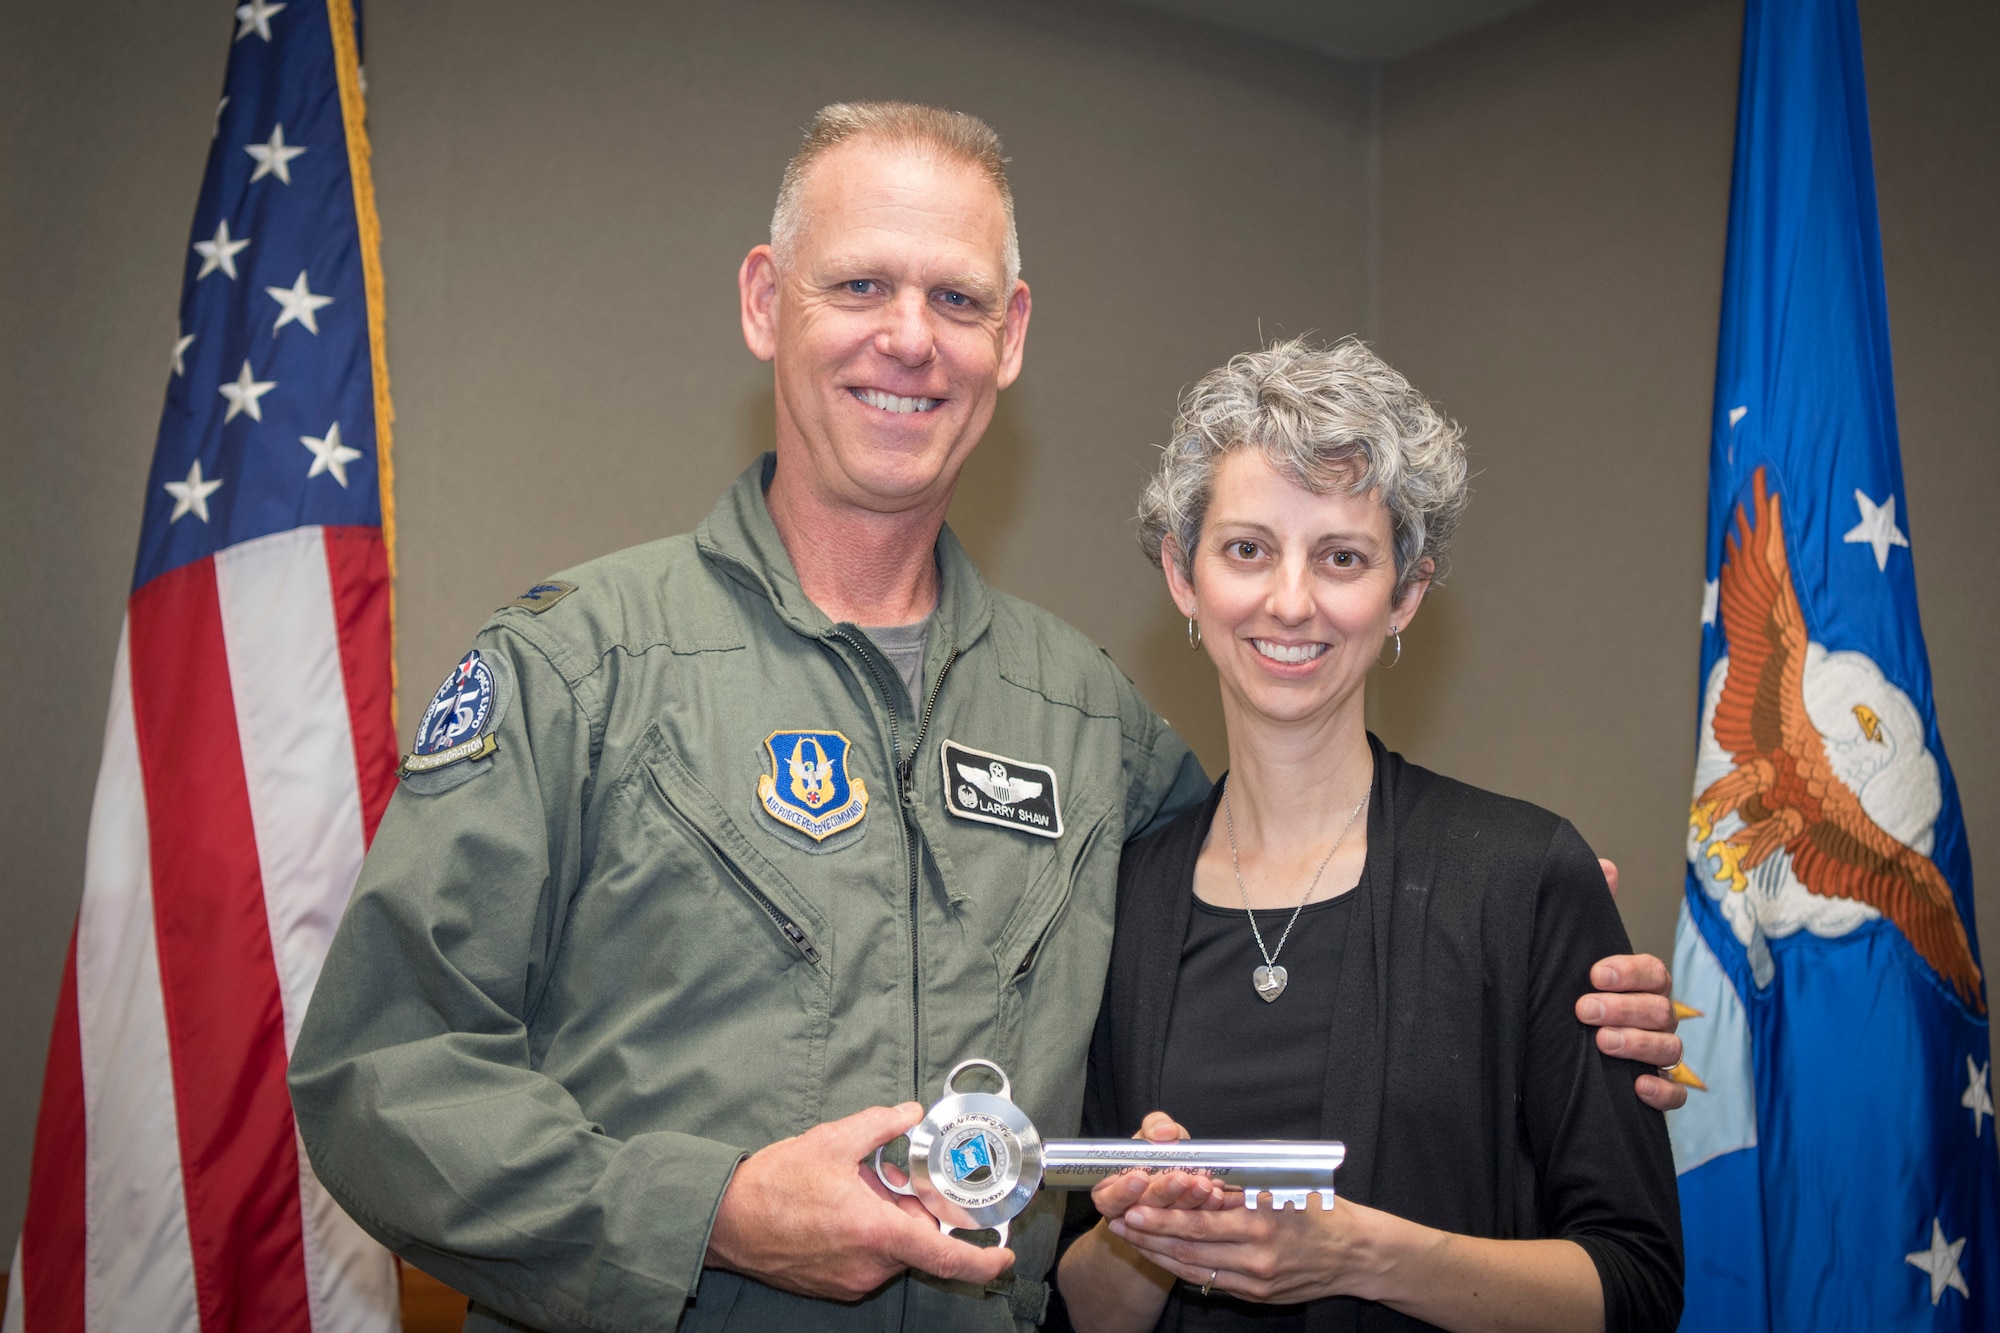 Rachel Grasmick, 434th Air Refueling Wing Key Spouse volunteer and Col. Larry Shaw, 434th ARW commander, pose for a photo after she received a key spouse award during a volunteer appreciation event at Grissom Air Reserve Base, Indiana, May 4, 2019. Grasmick received the 2018 Key Spouse award for her service to the program donating more than 250 hours supporting Airmen and family of Grissom service members. (U.S. Air Force photo/Master Sgt. Ben Mota)